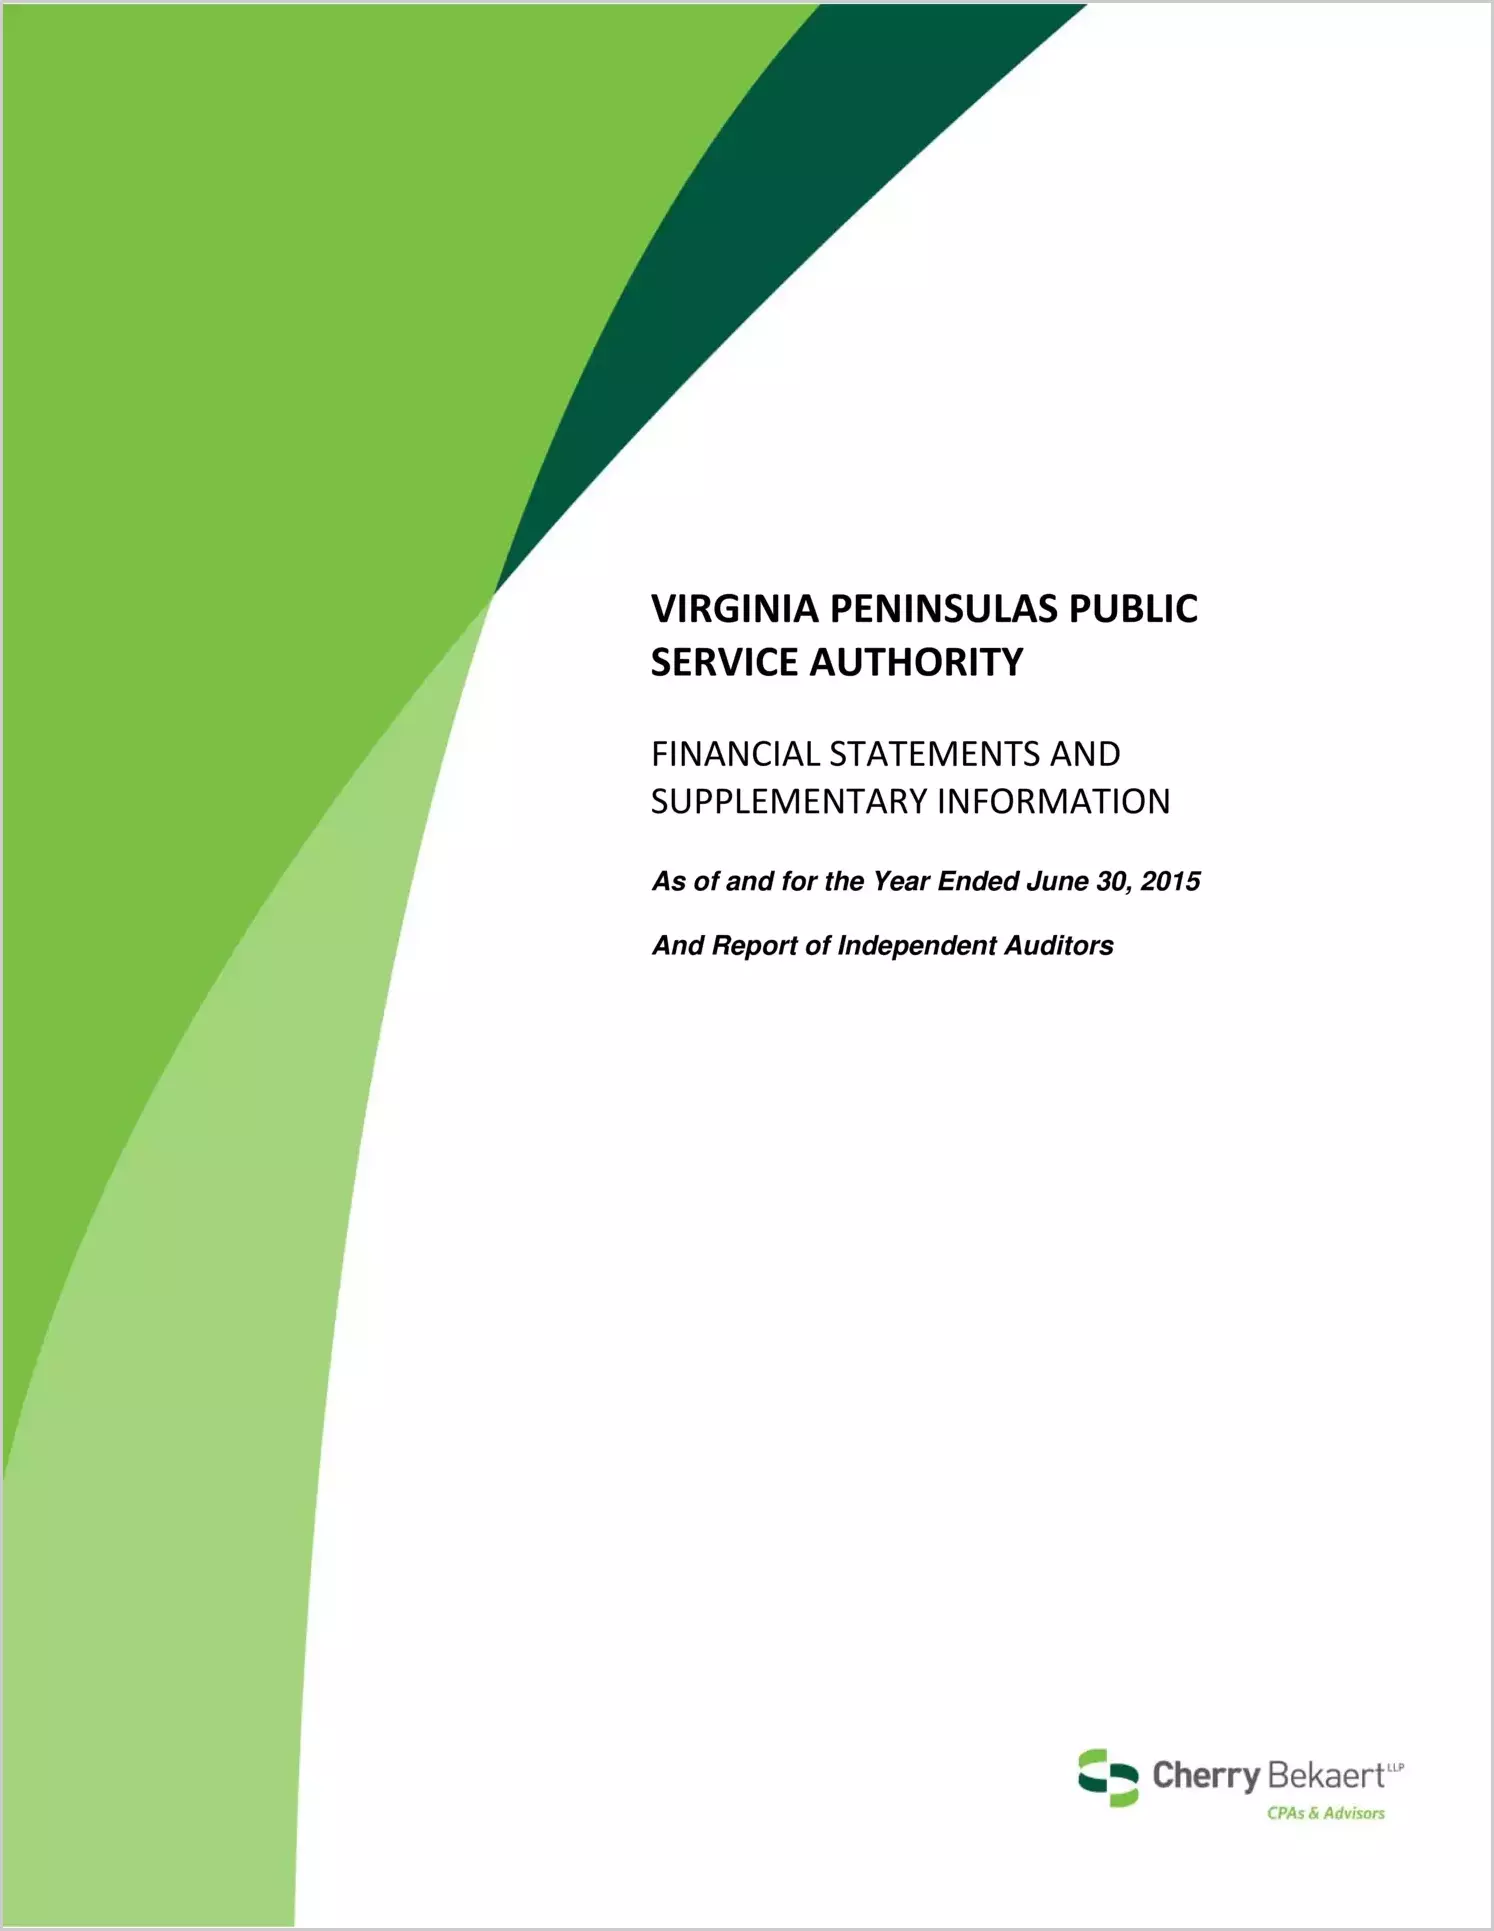 2015 ABC/Other Annual Financial Report  for Virginia Peninsulas Public Service Authority